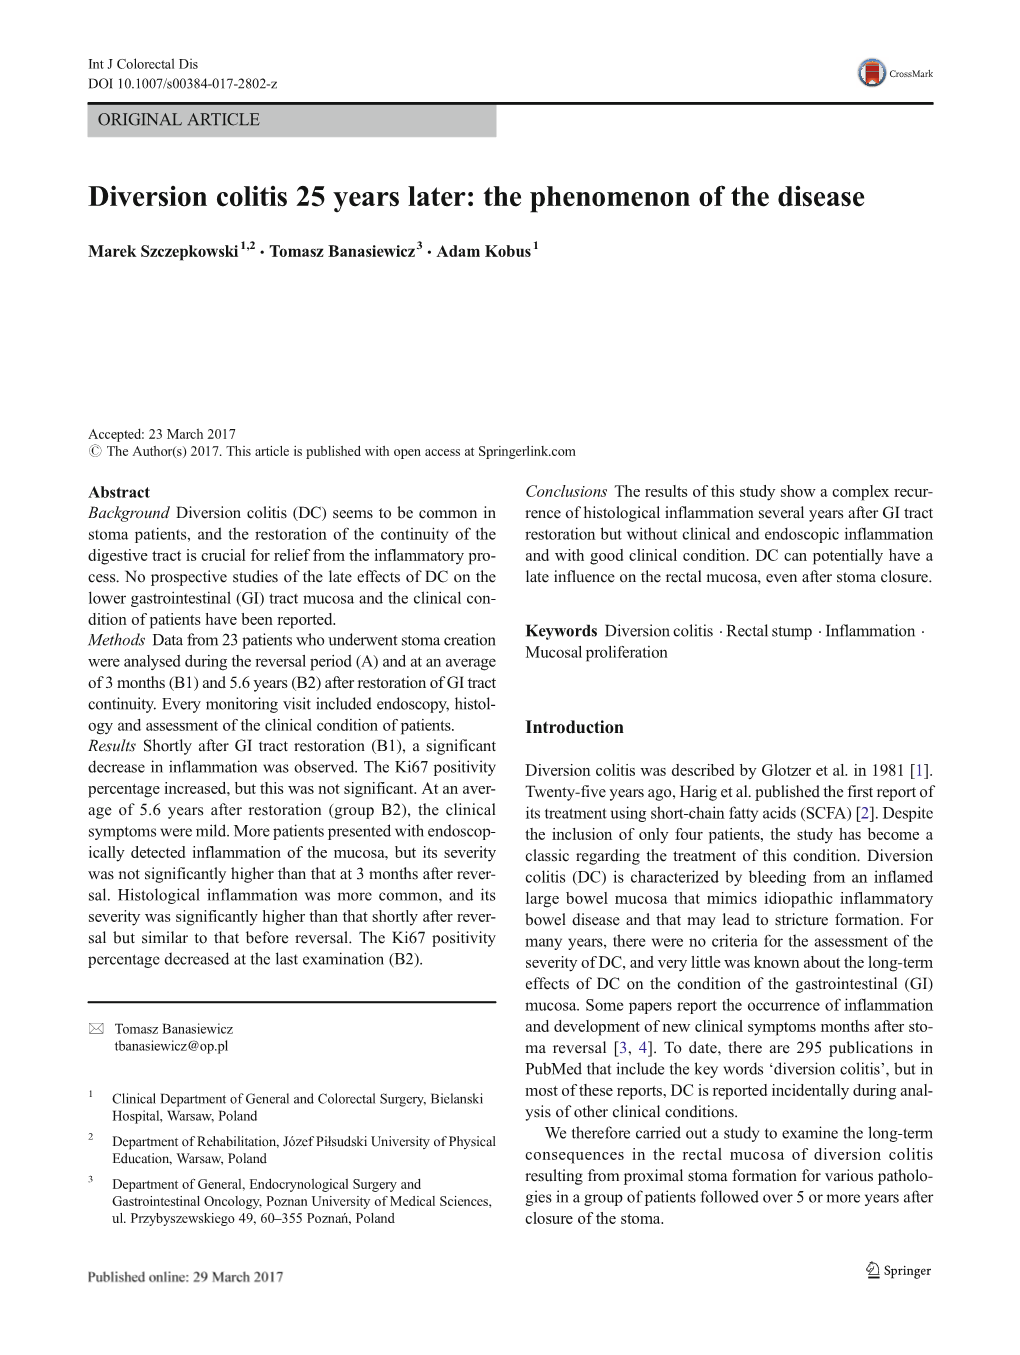 Diversion Colitis 25 Years Later: the Phenomenon of the Disease